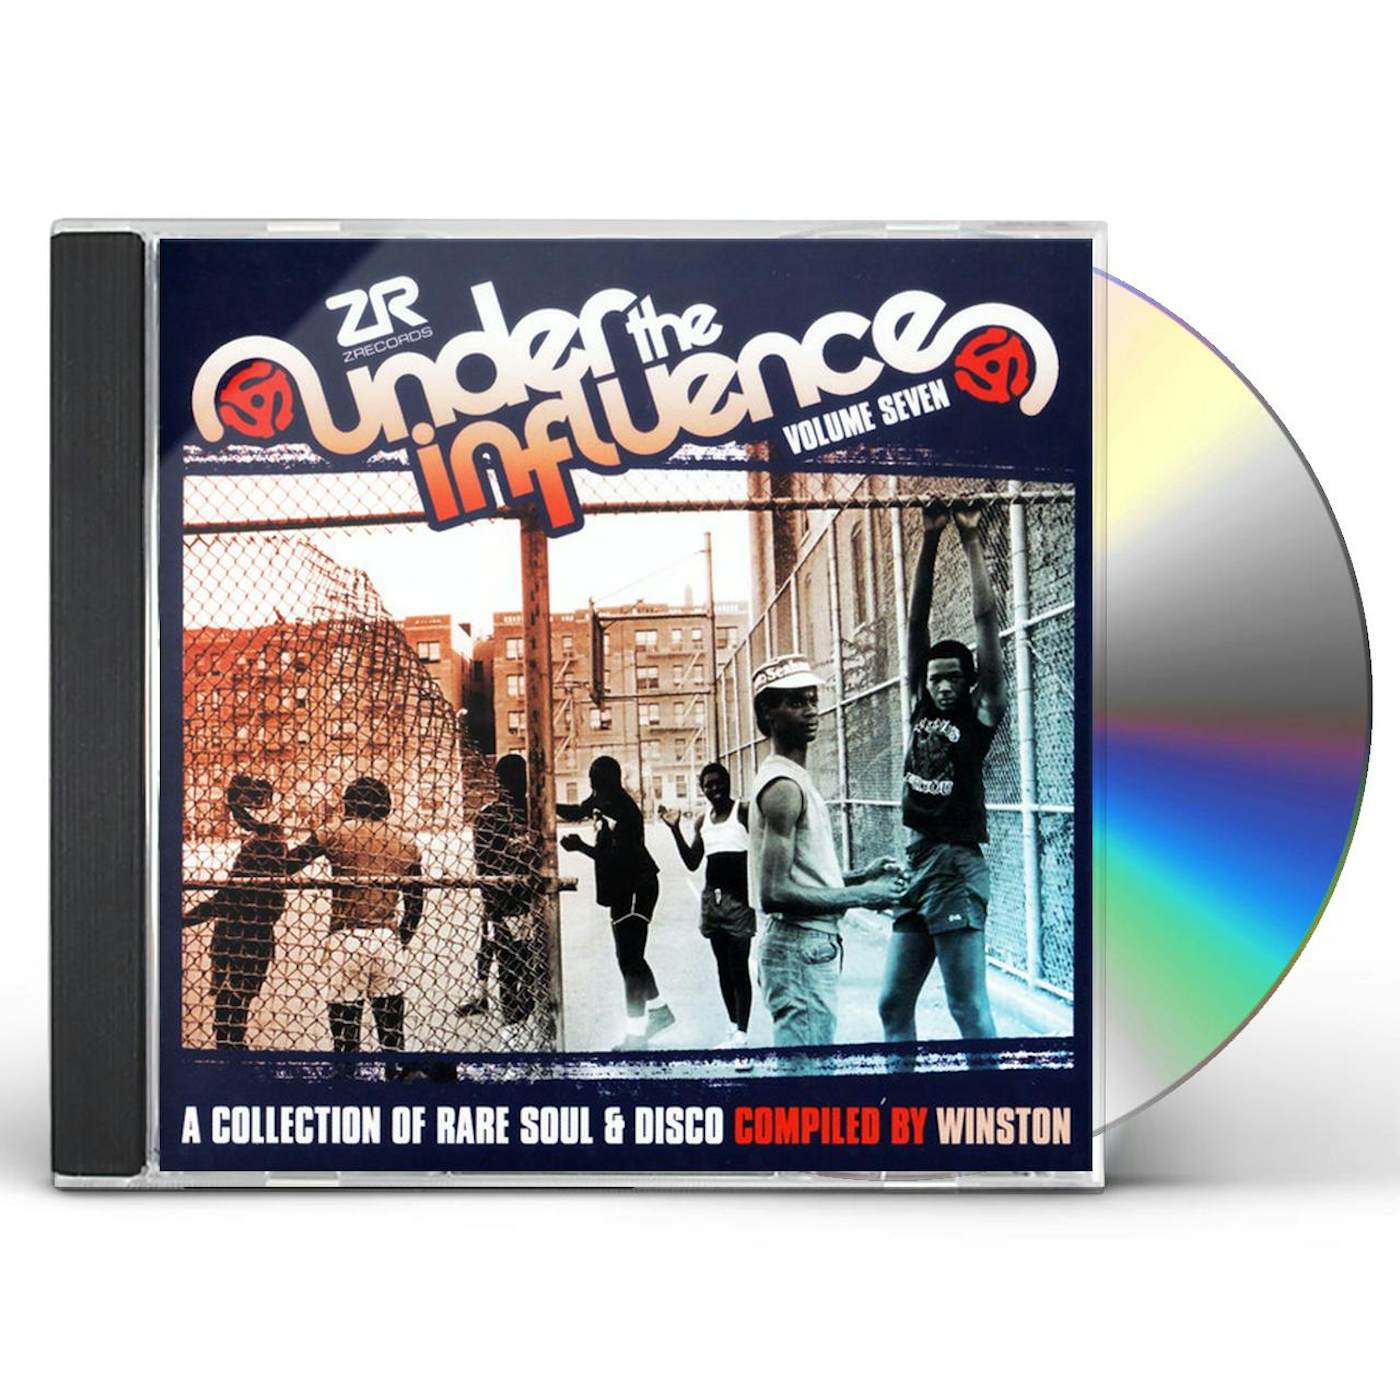 Winston Under The Influence Vol. 7: A Collection Of Rare Soul And Disco CD